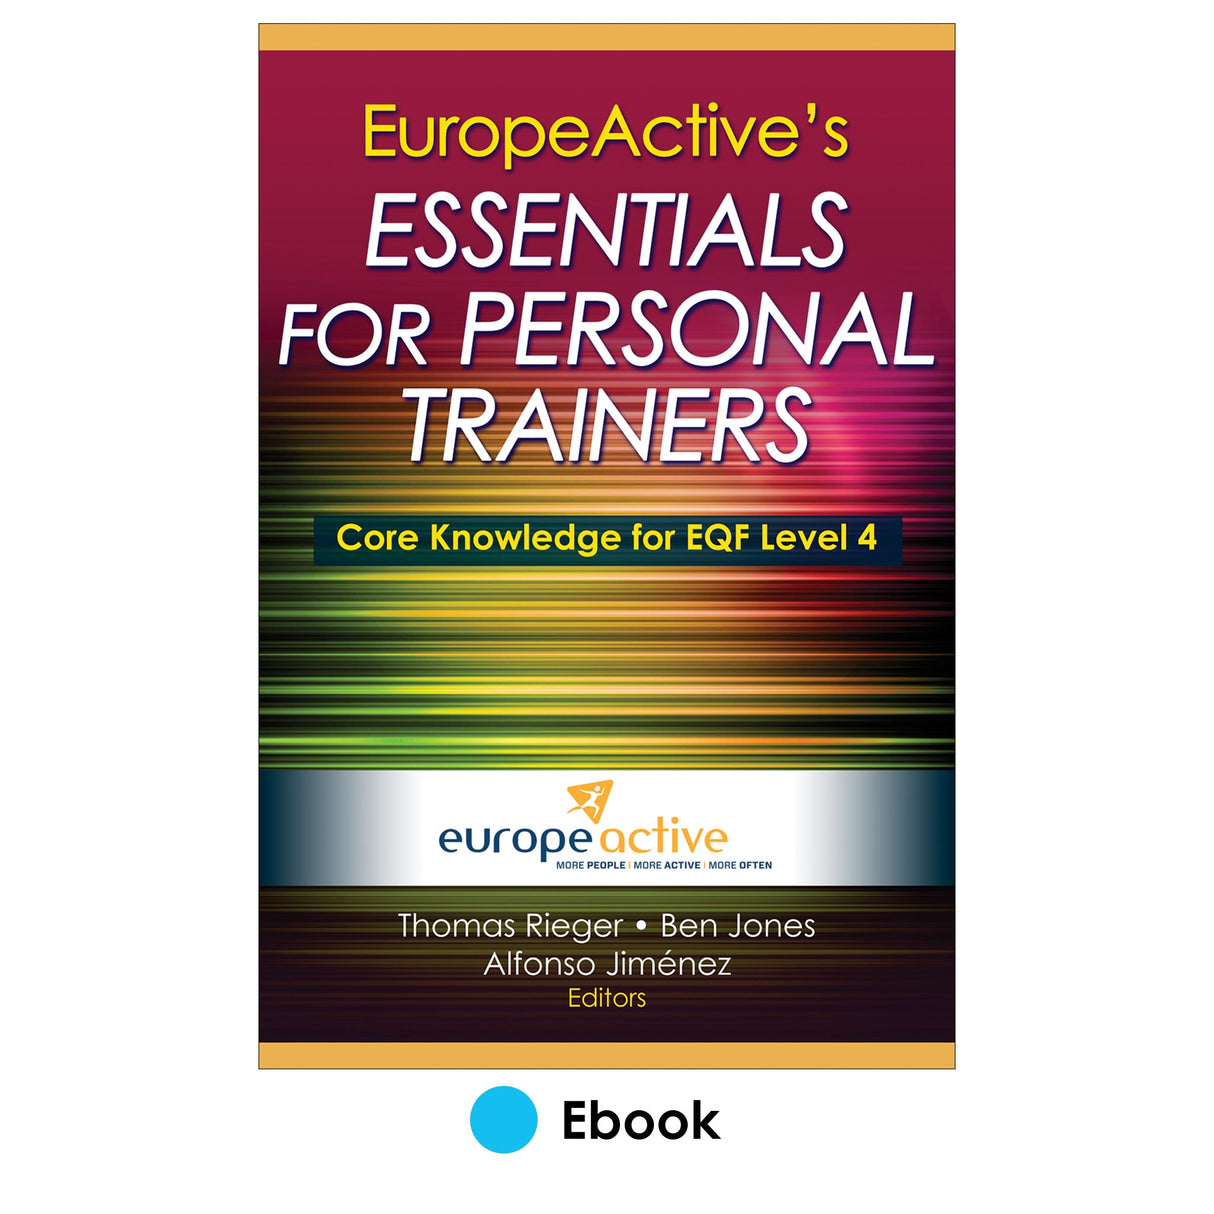 EuropeActive's Essentials for Personal Trainers PDF